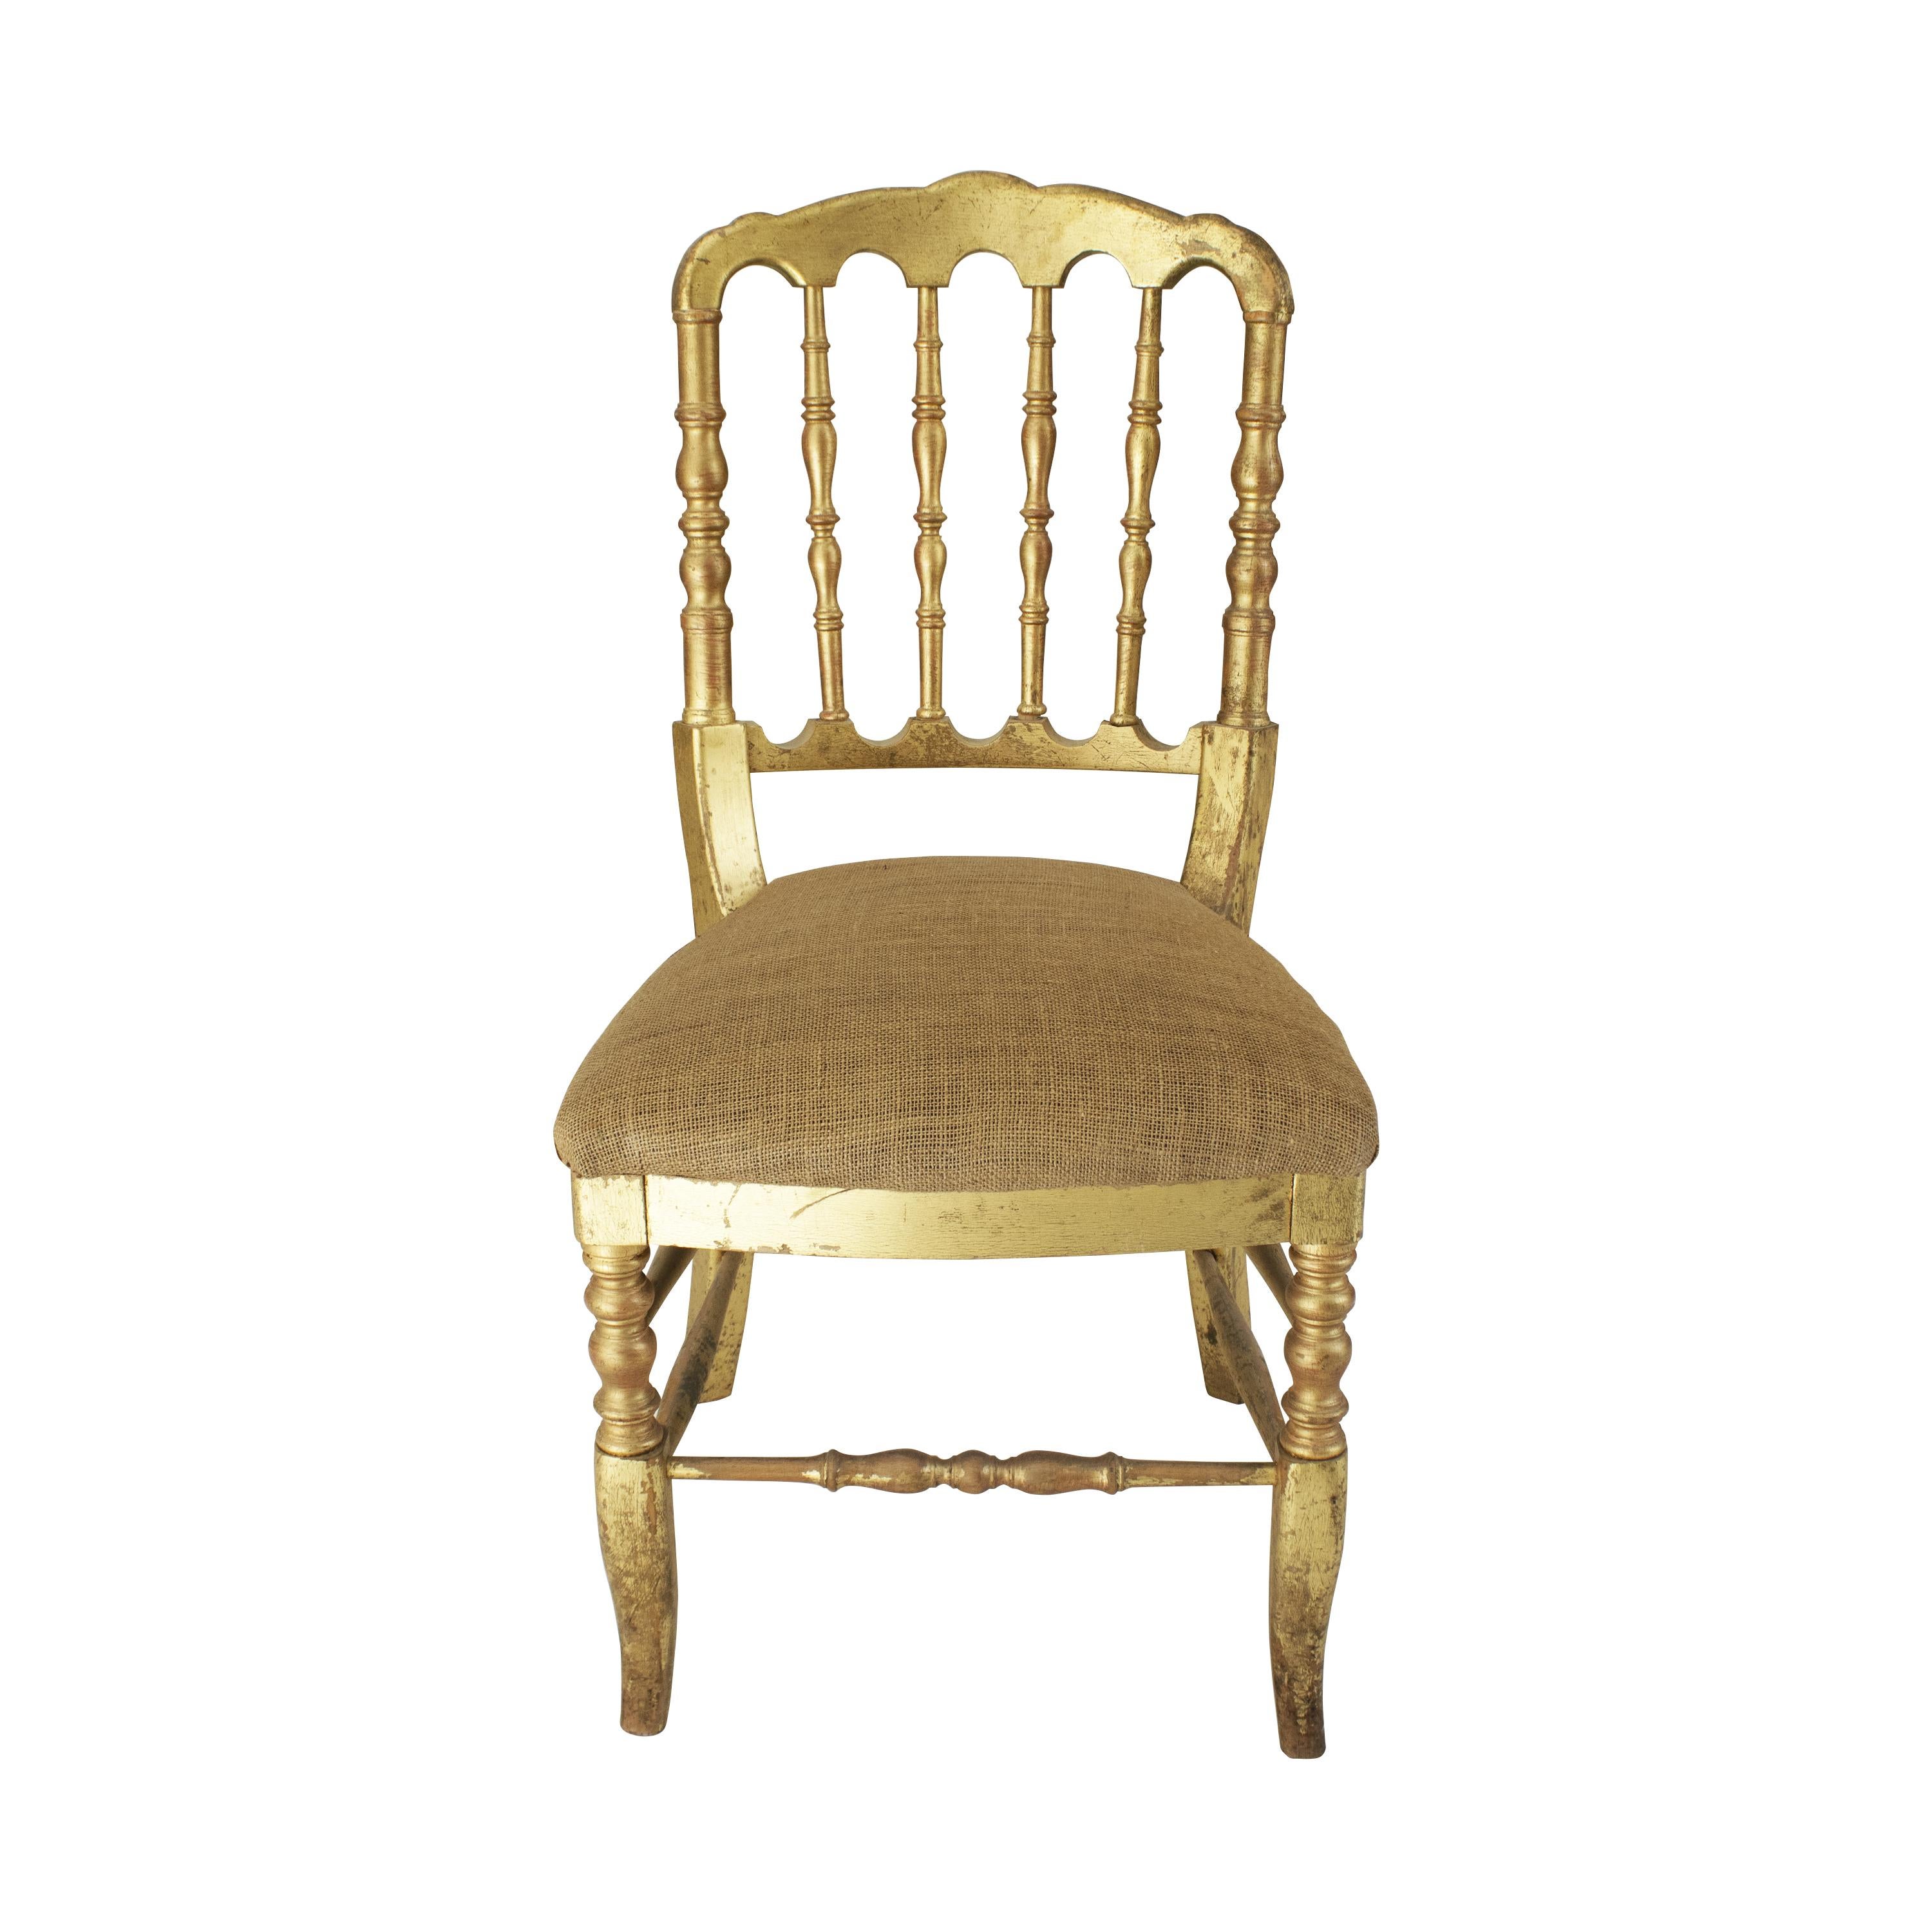 Tiffany style chair also known as the Chiavari chair made in France circa 1960s. The structure of the chair is made entirely of solid wood turned by hand and polychromed with handmade gold leaf. The padded seat is upholstered in raffia.

Price by